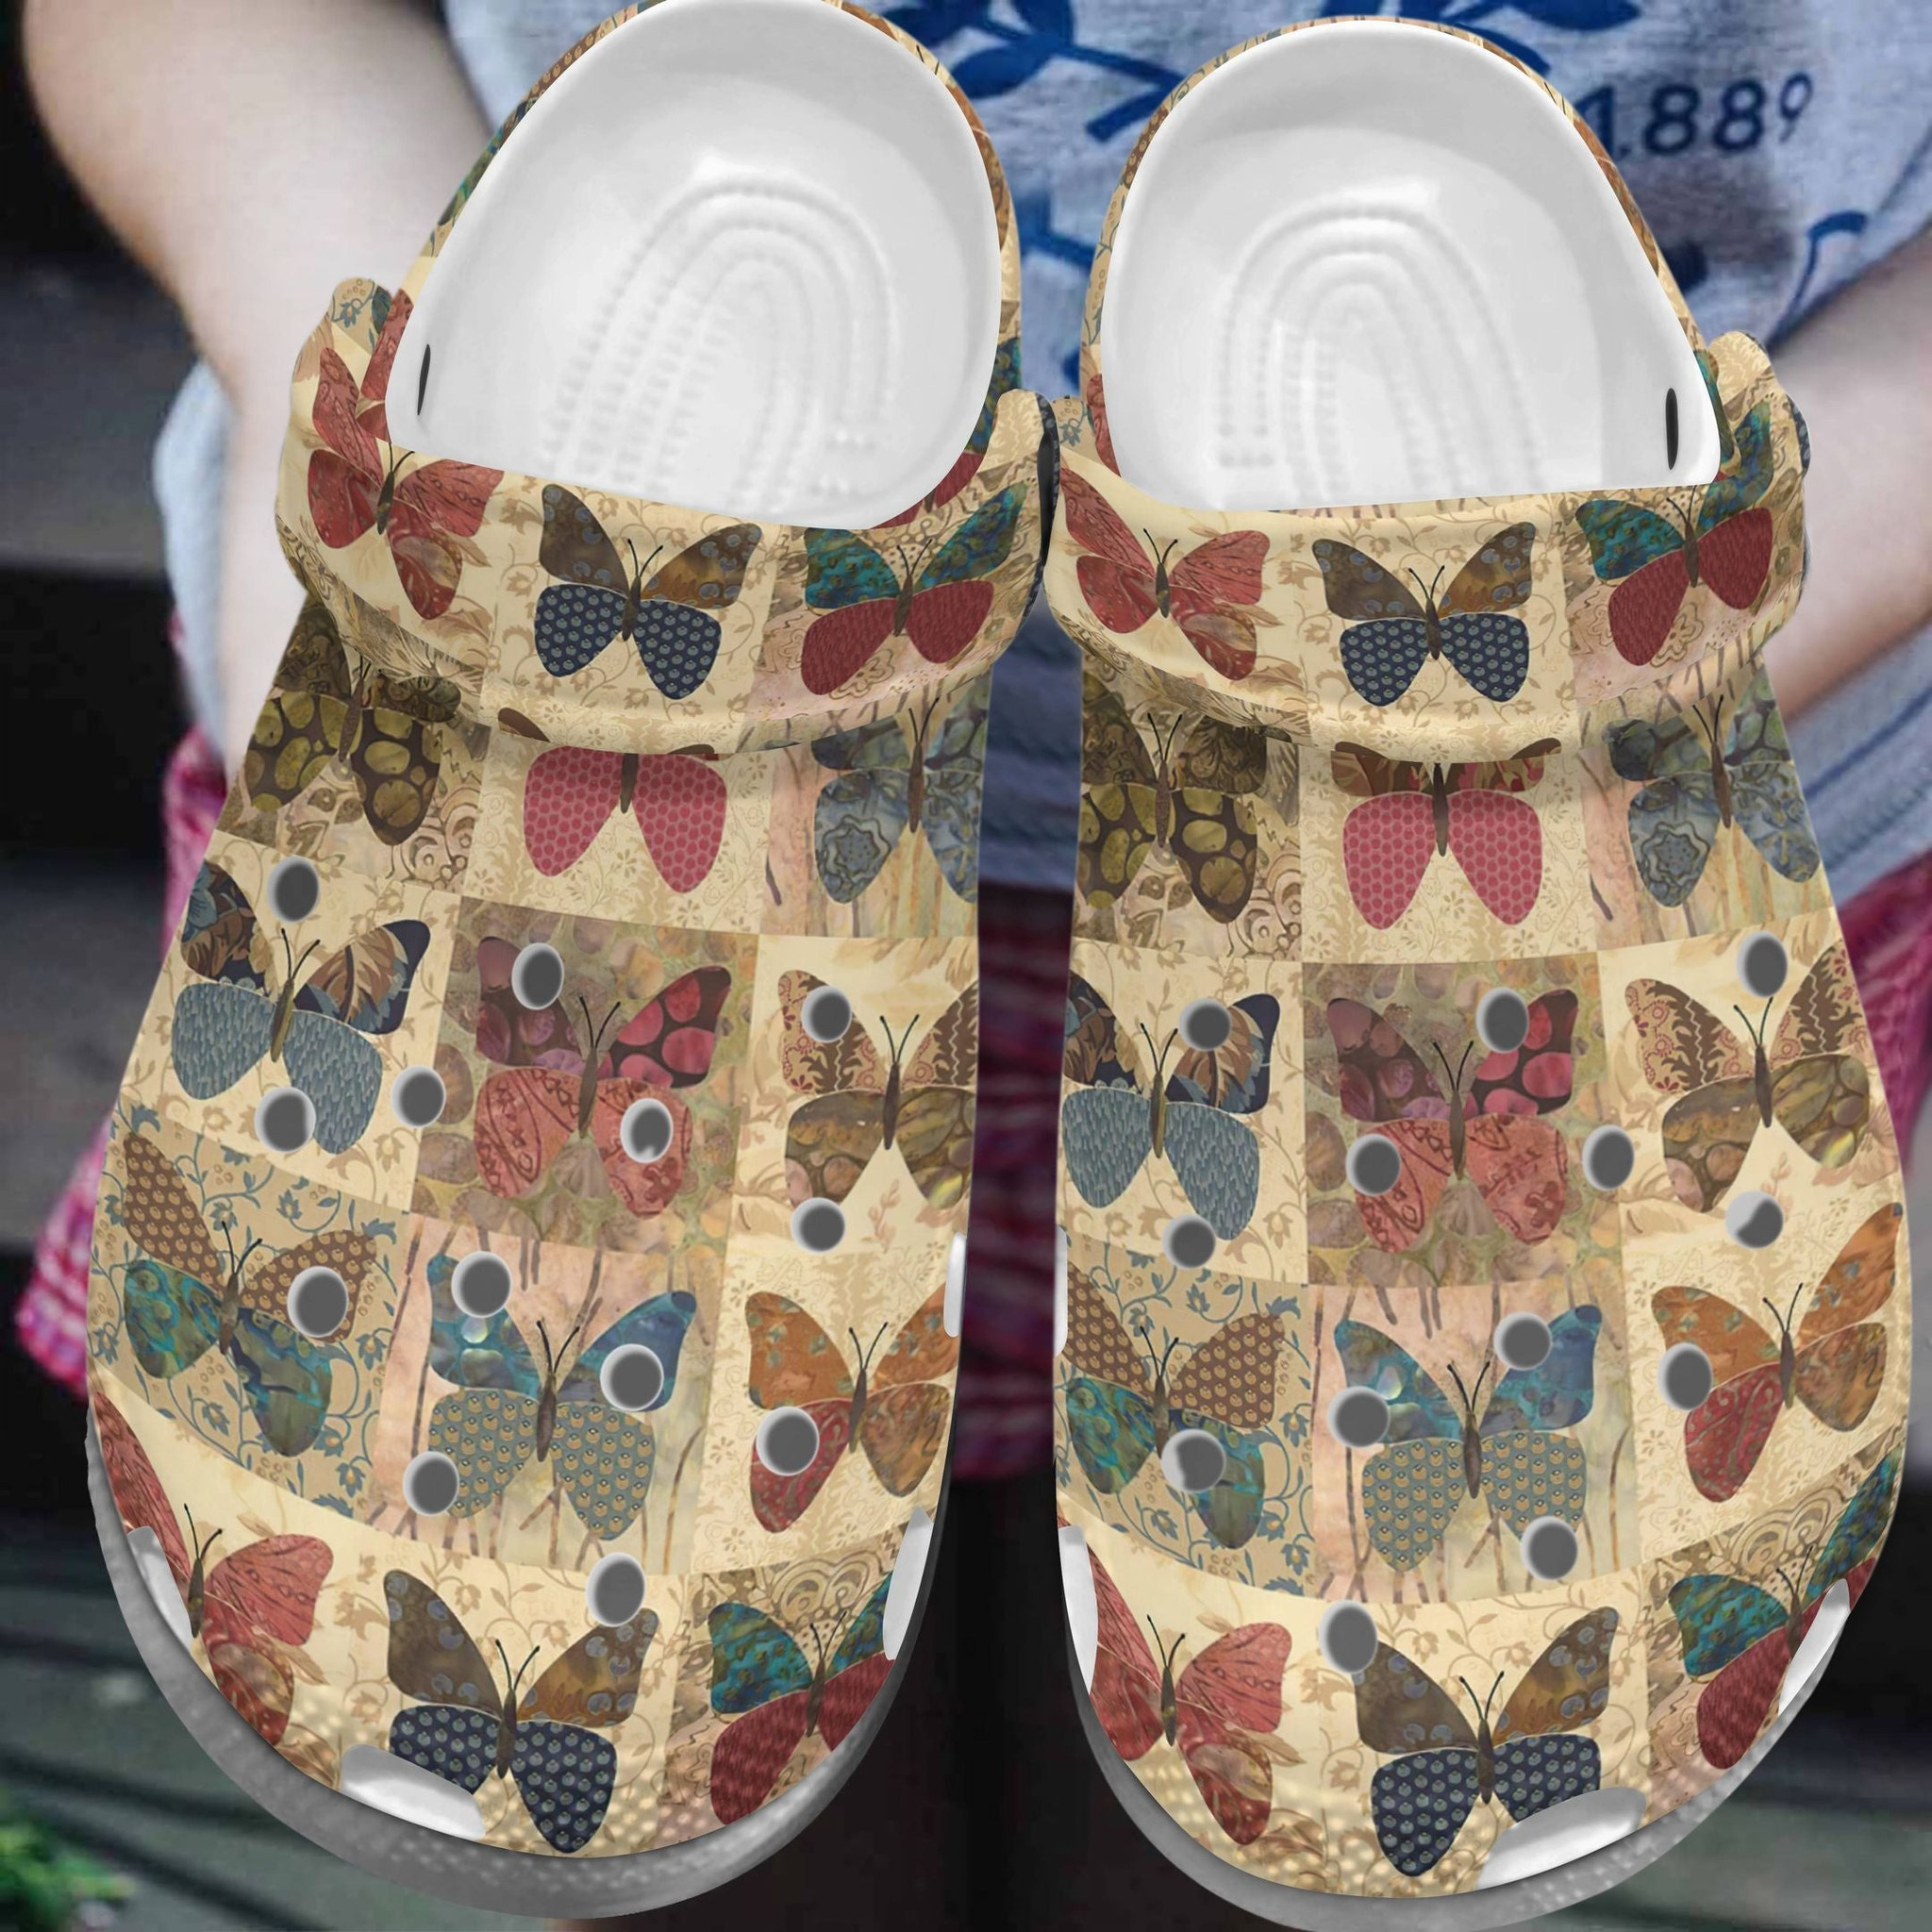 Butterfly Collection Croc Crocs Shoes For Women Men - Butterflies Crocs Shoes Crocbland Clog Gifts For Mother Day Grandma